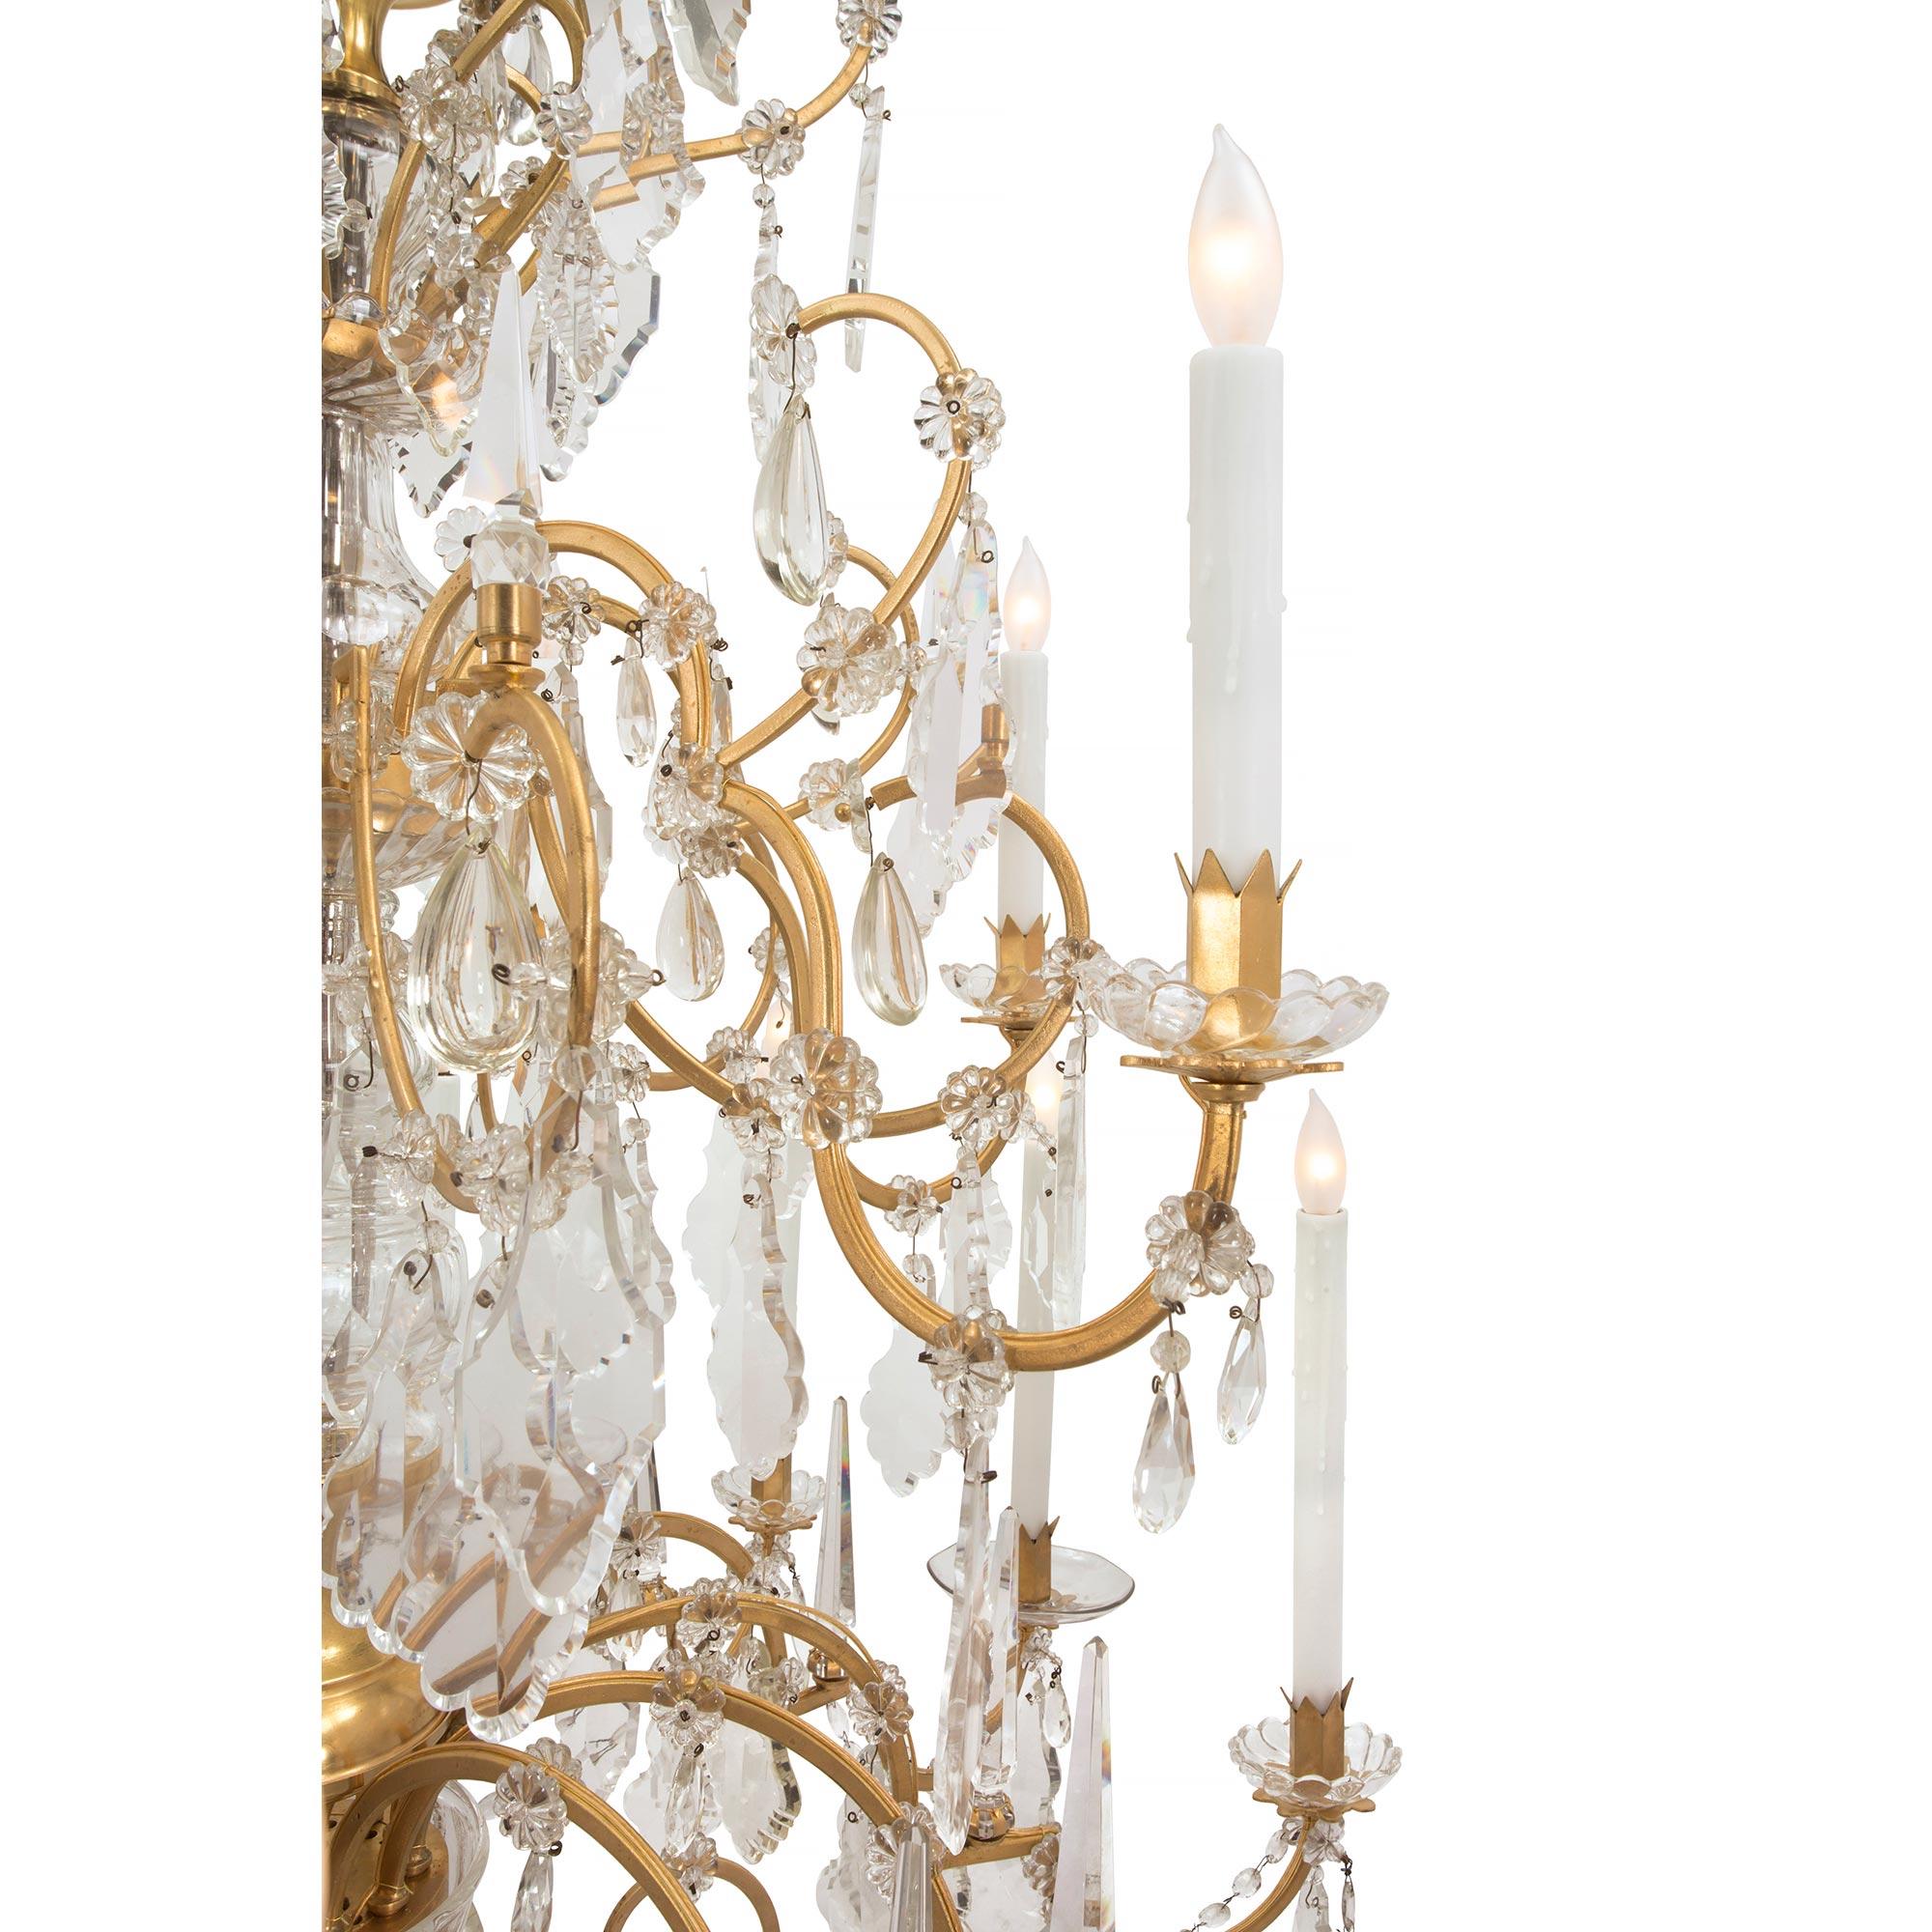 Italian 19th Century Louis XVI Style Eighteen-Arm Chandelier In Good Condition For Sale In West Palm Beach, FL